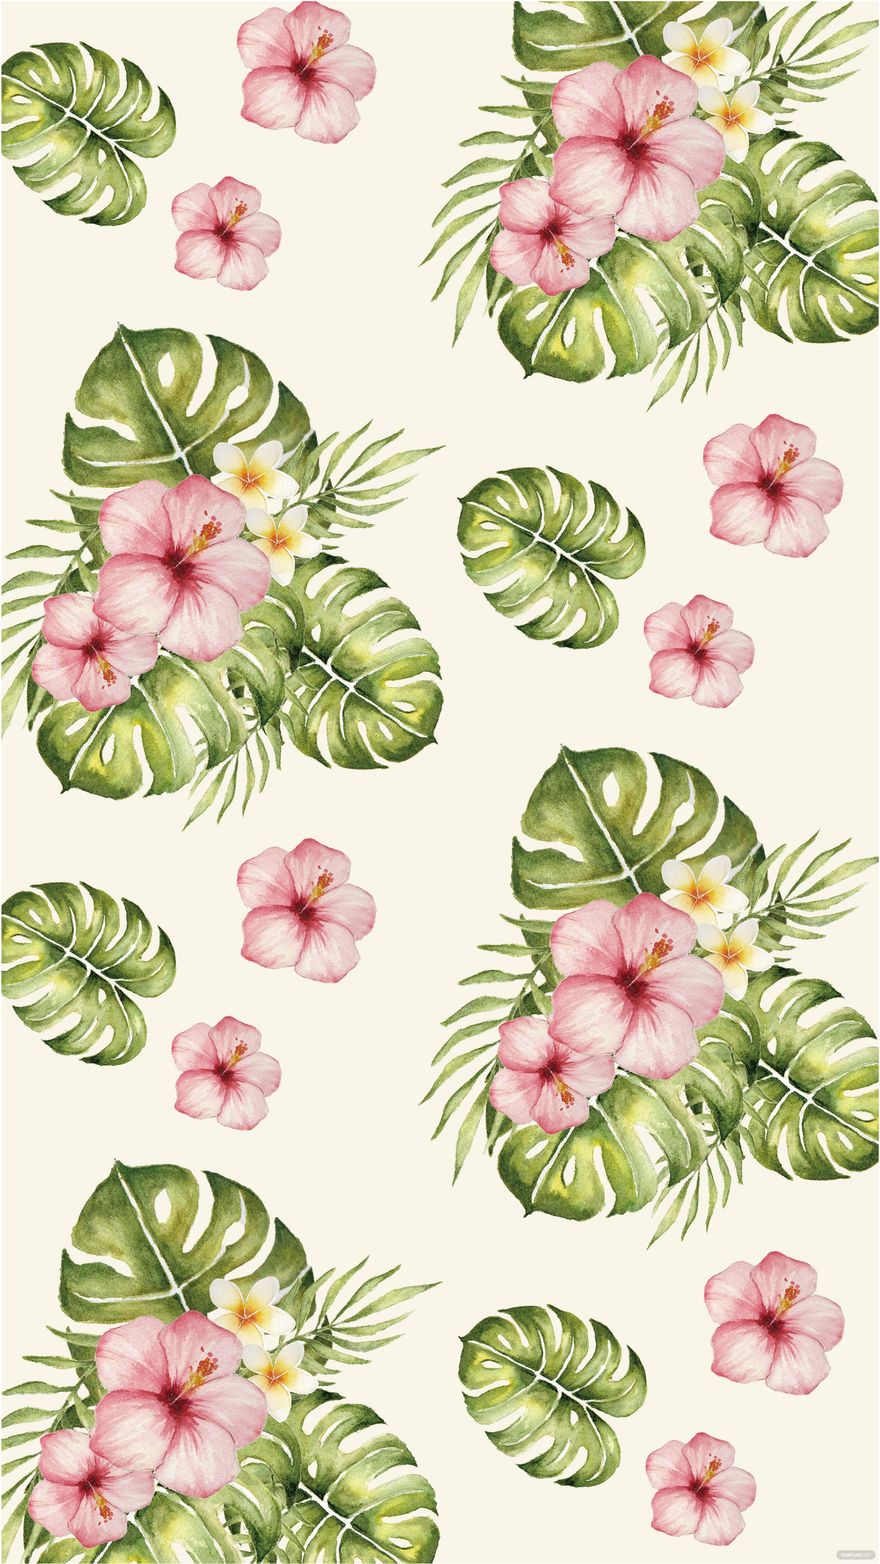 Floral Background - Images, HD, Free, Download 